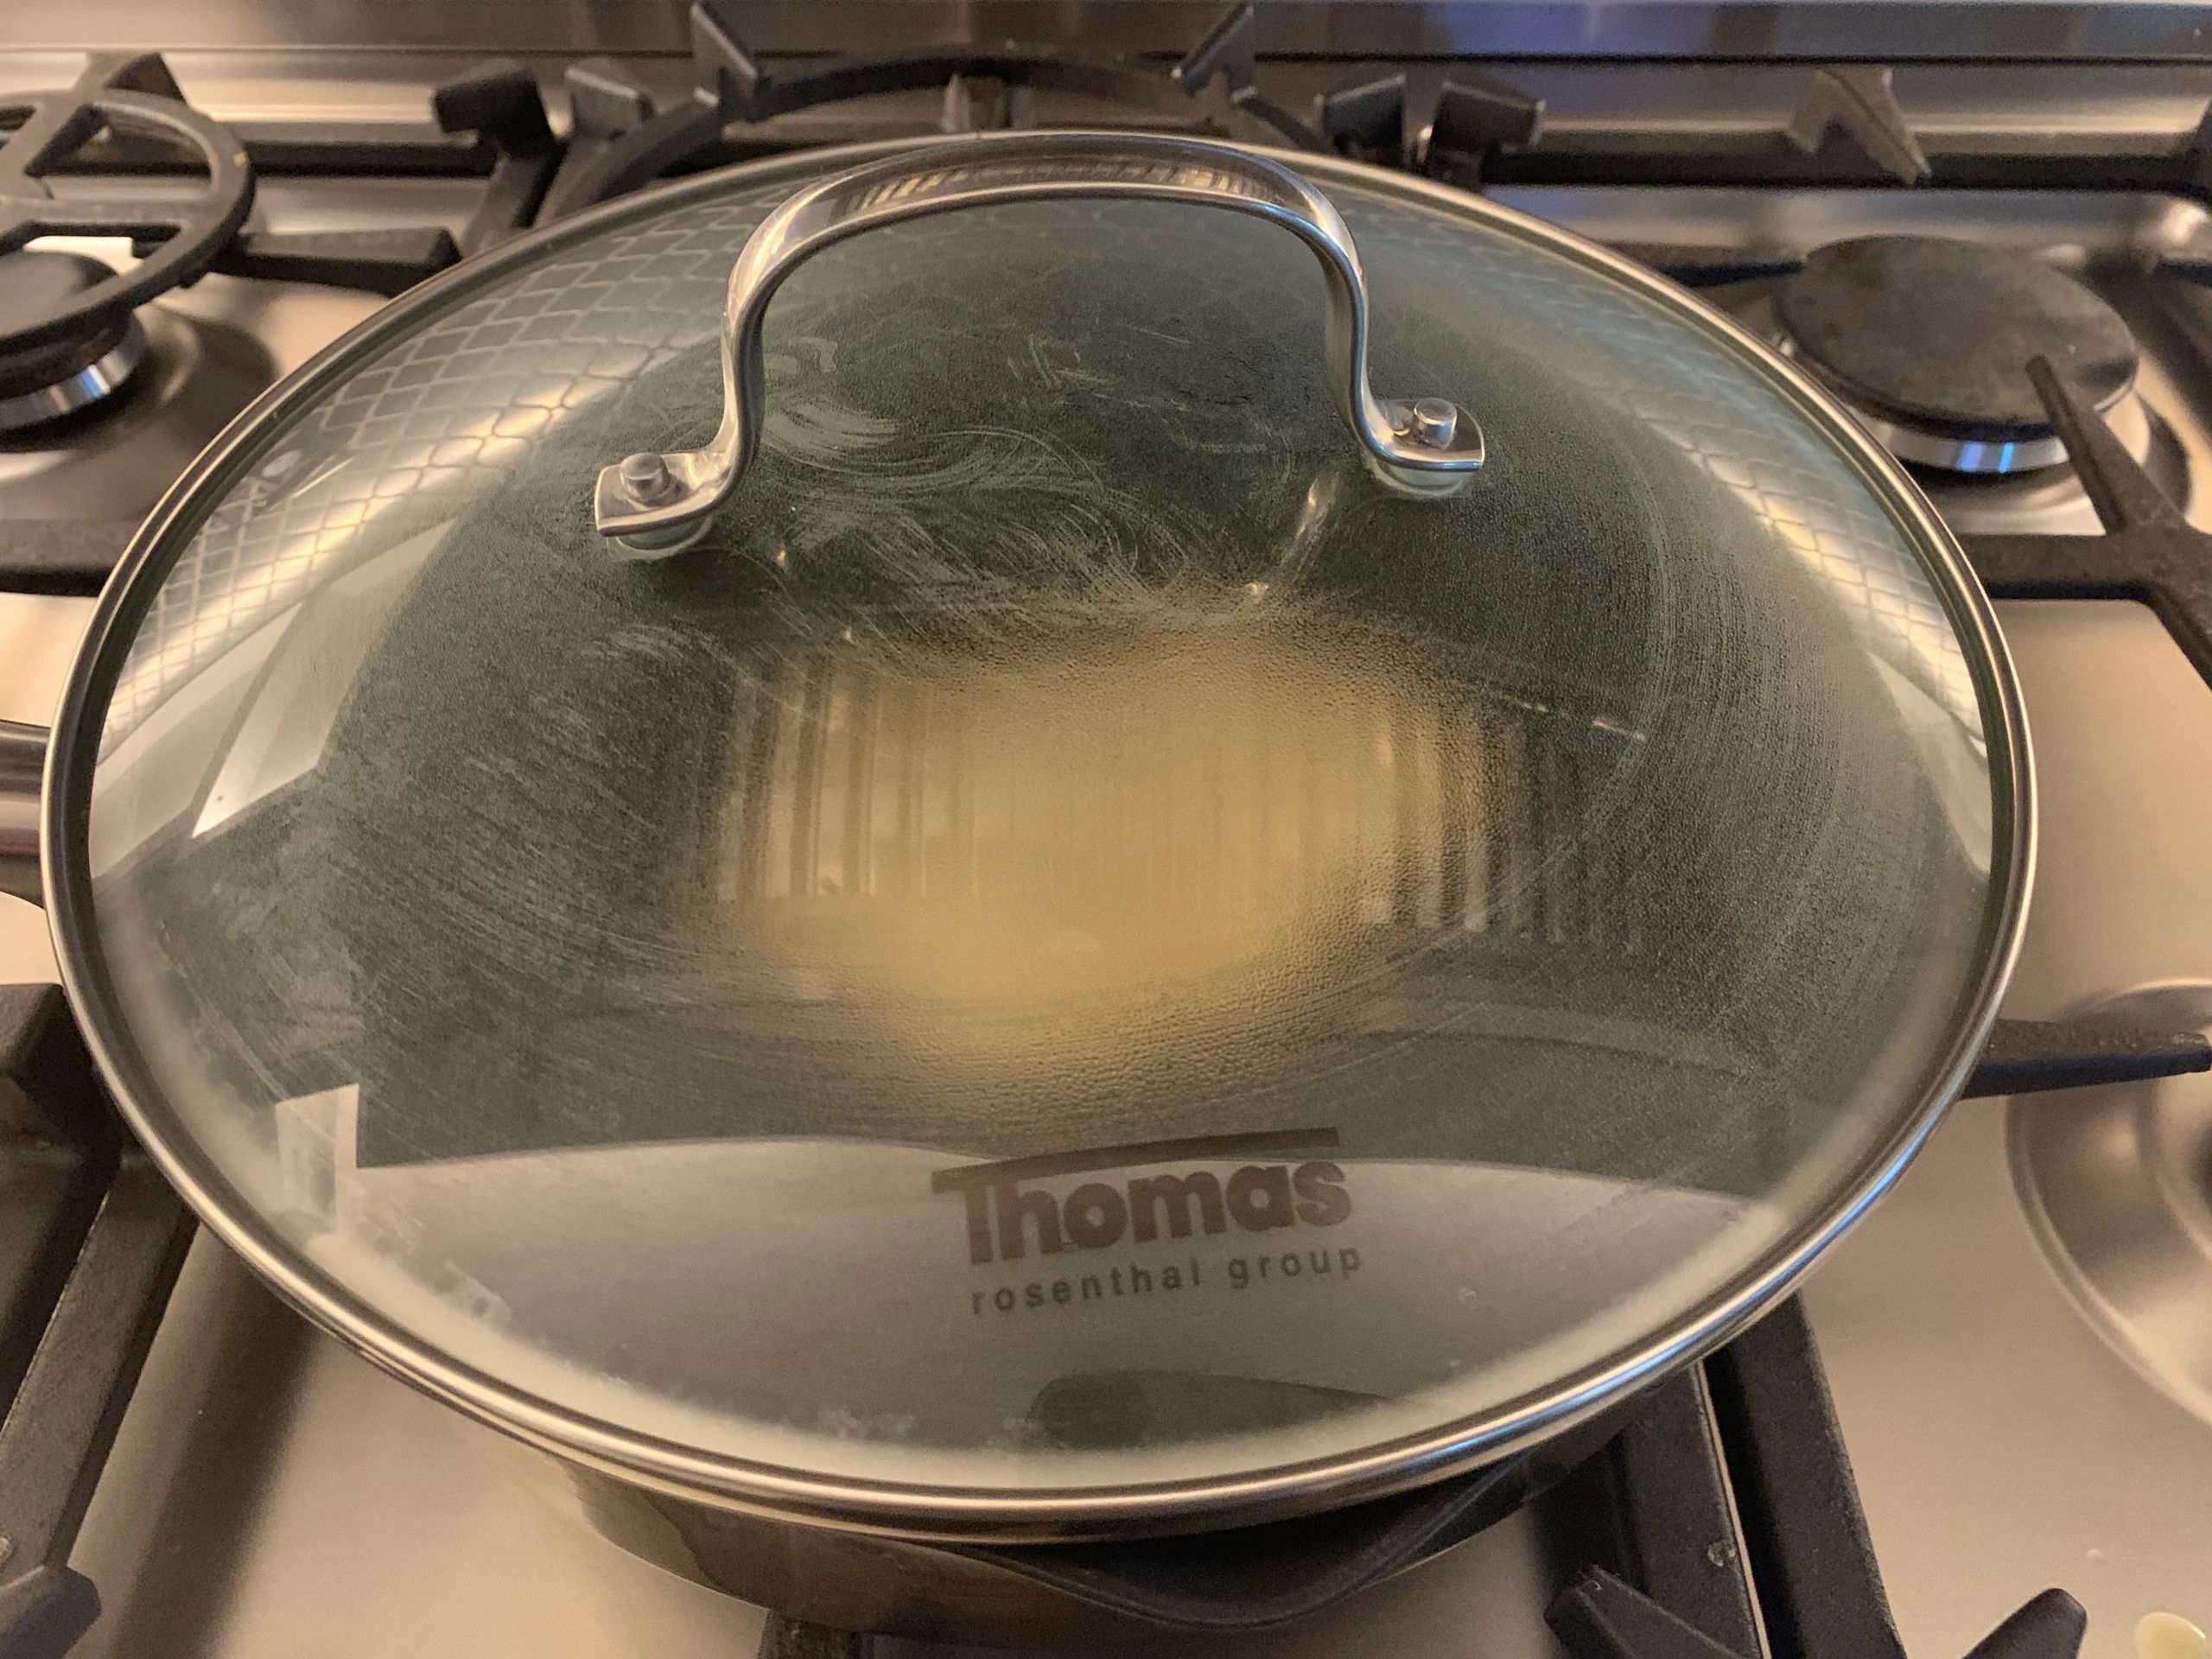 Thomas for Rosenthal Cookware